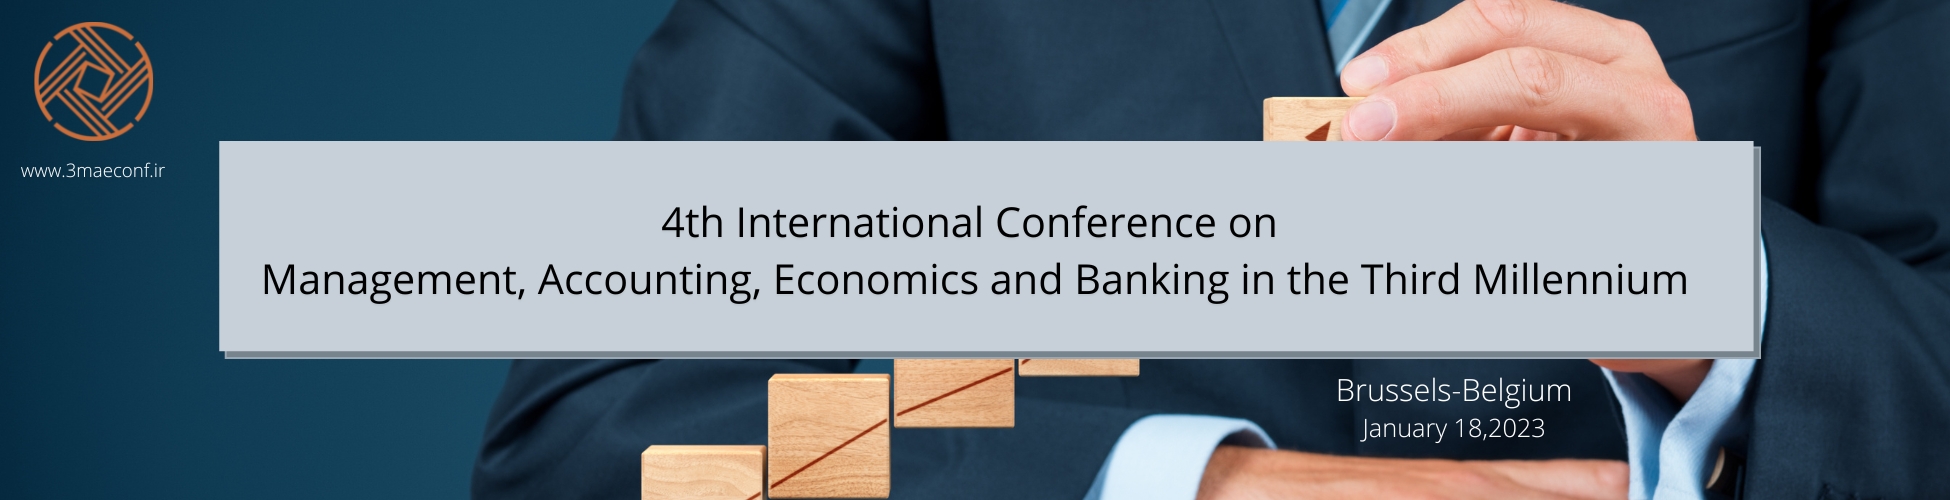 4th International Conference on Management, Accounting, Economics and Banking in the Third Millennium